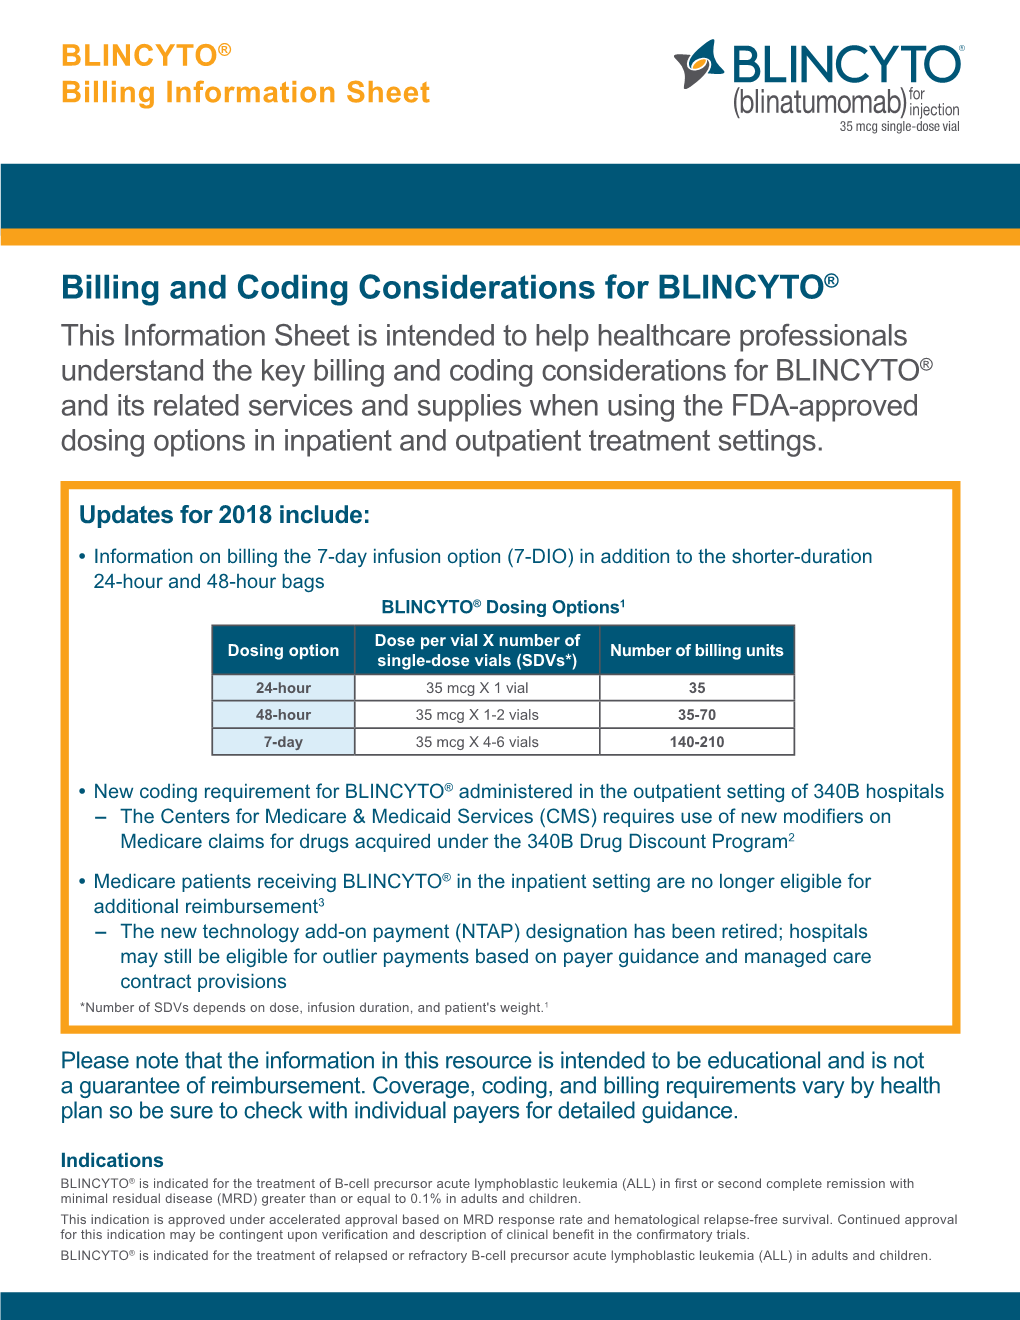 Billing and Coding Considerations for BLINCYTO®